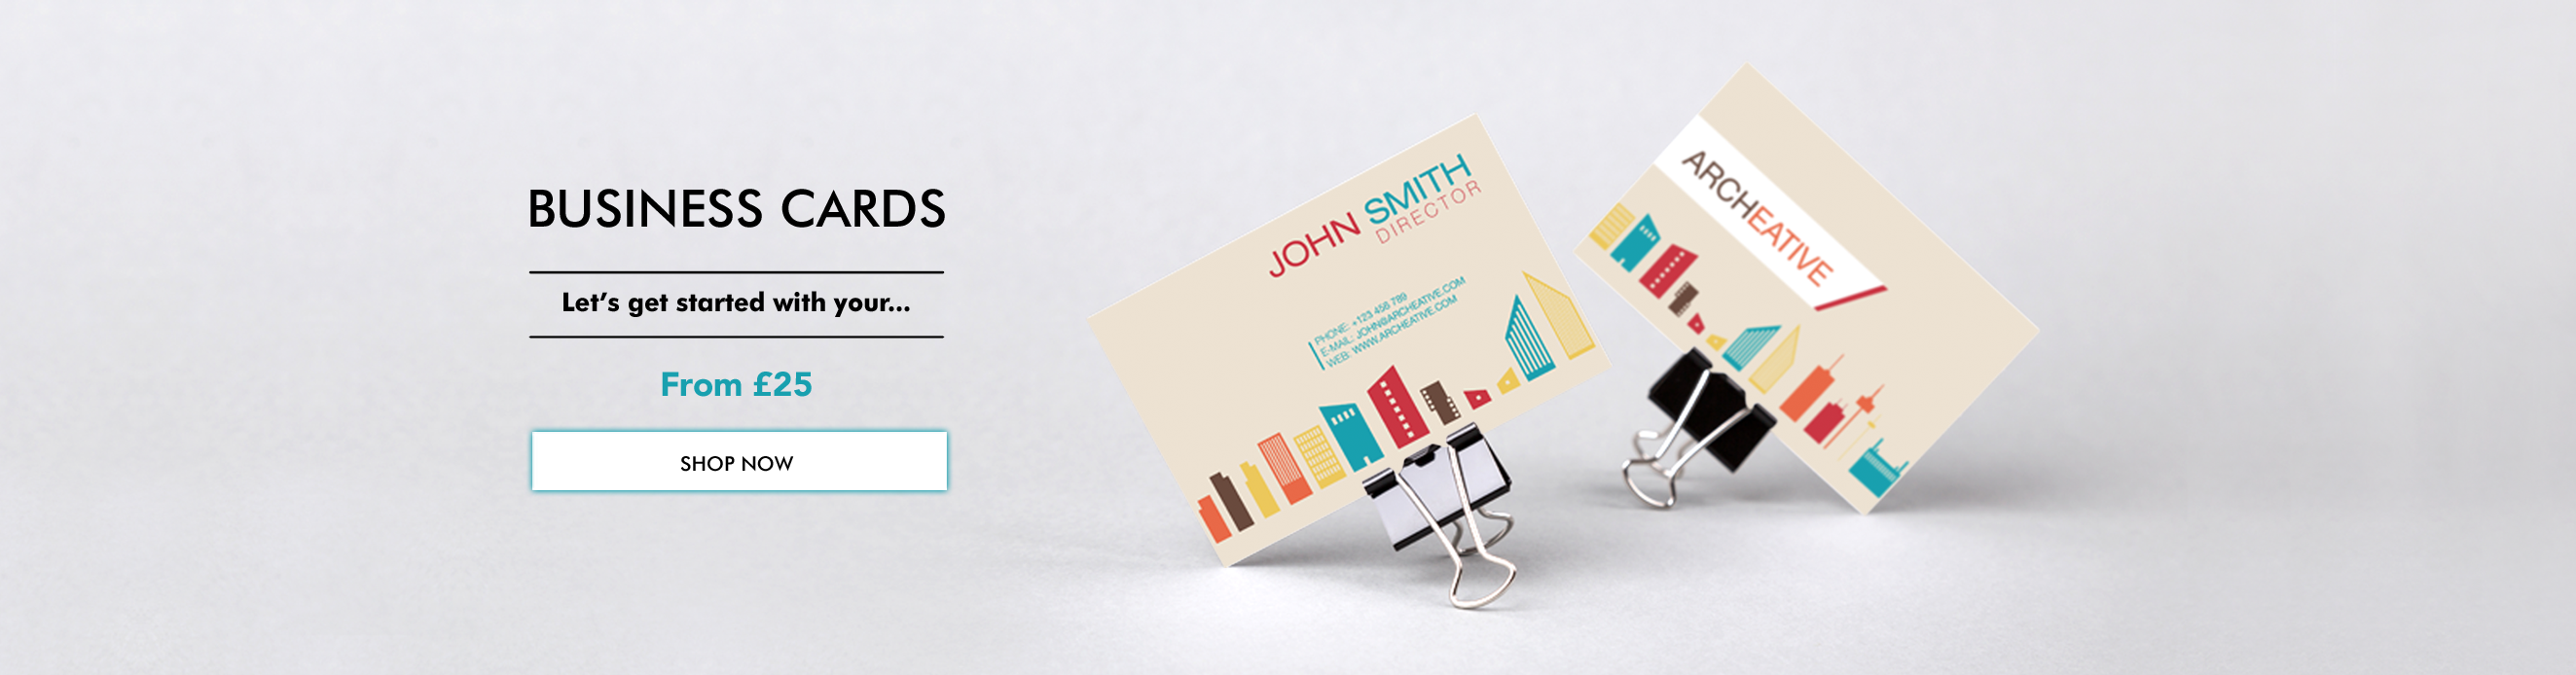 hp business cards 3